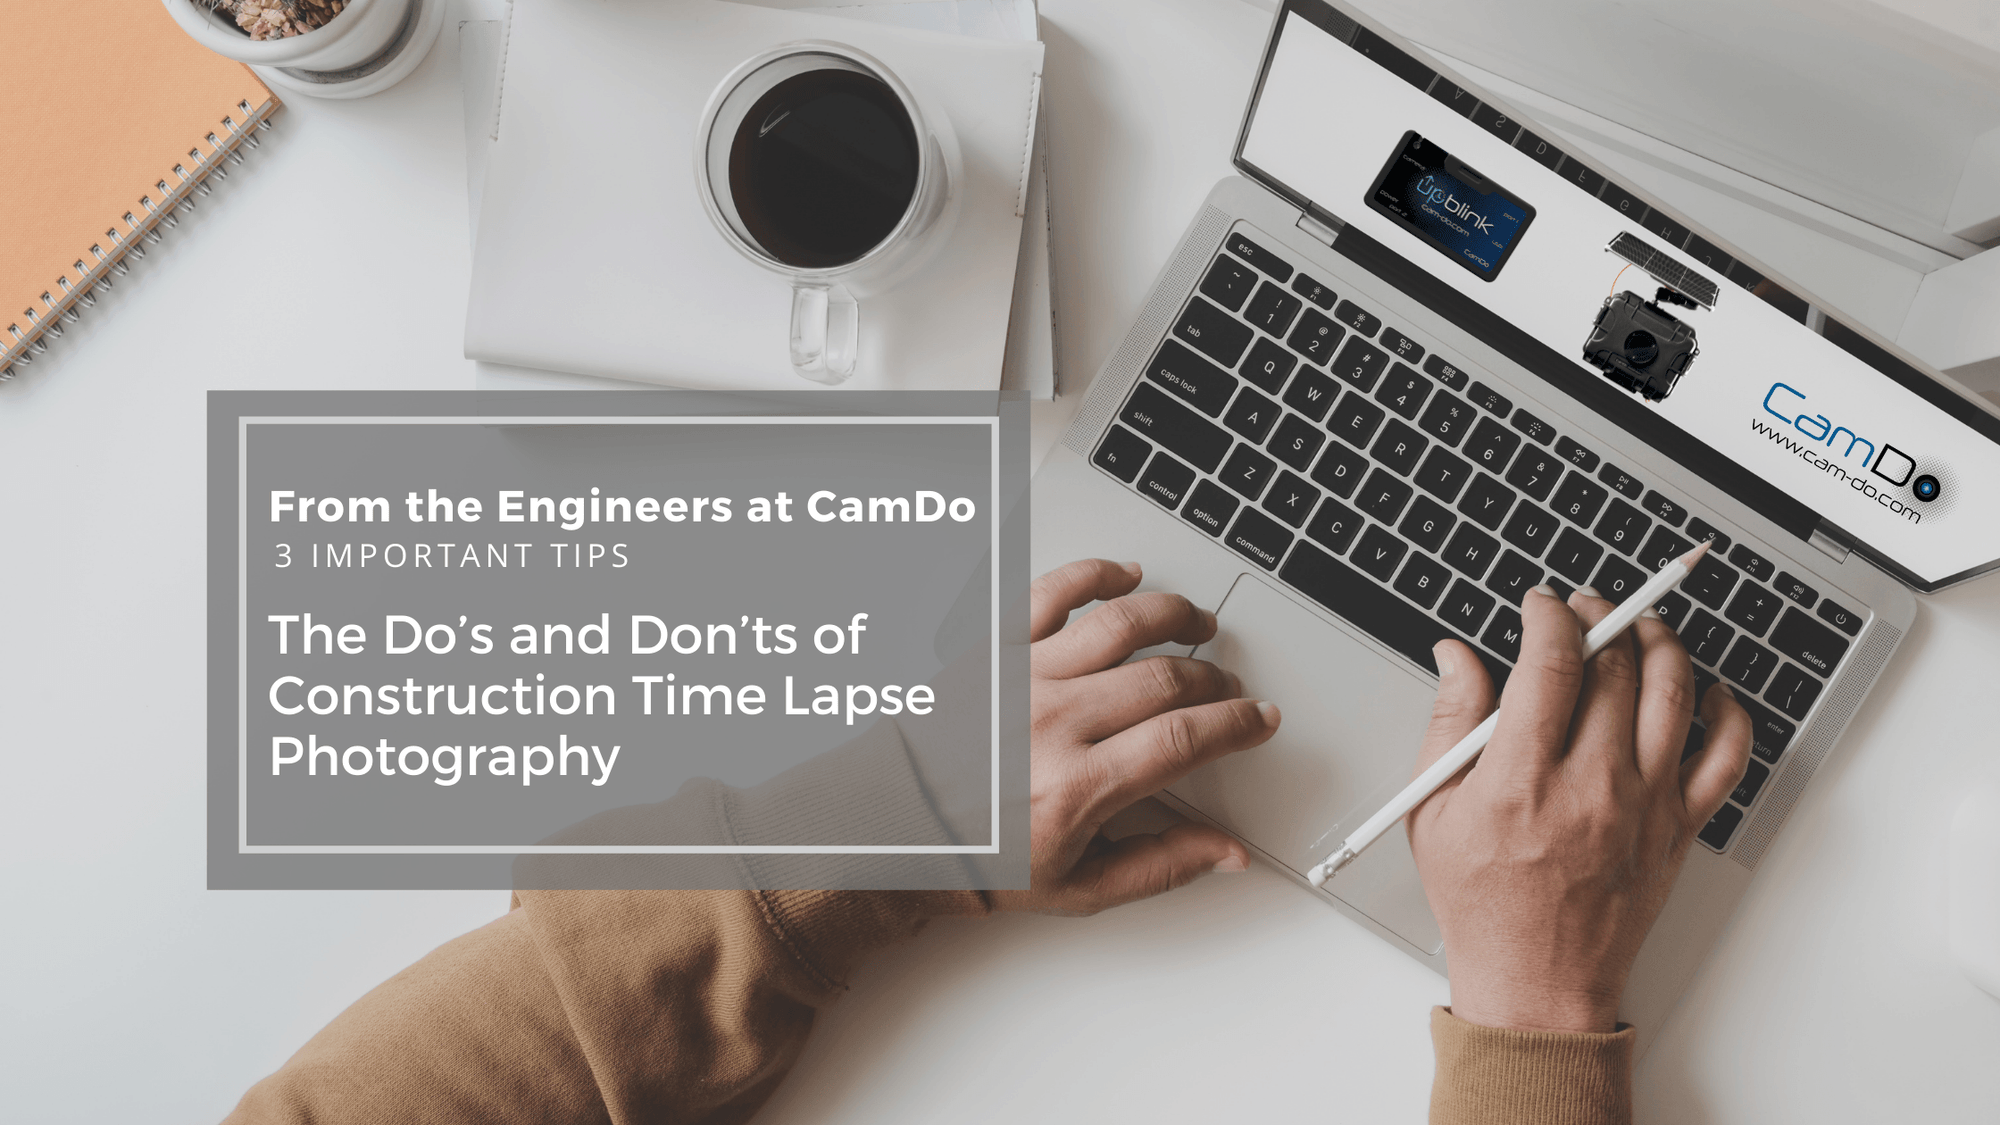 Part 1: From the Engineers at CamDo: The Do’s and Don’ts of Construction Time Lapse Photography